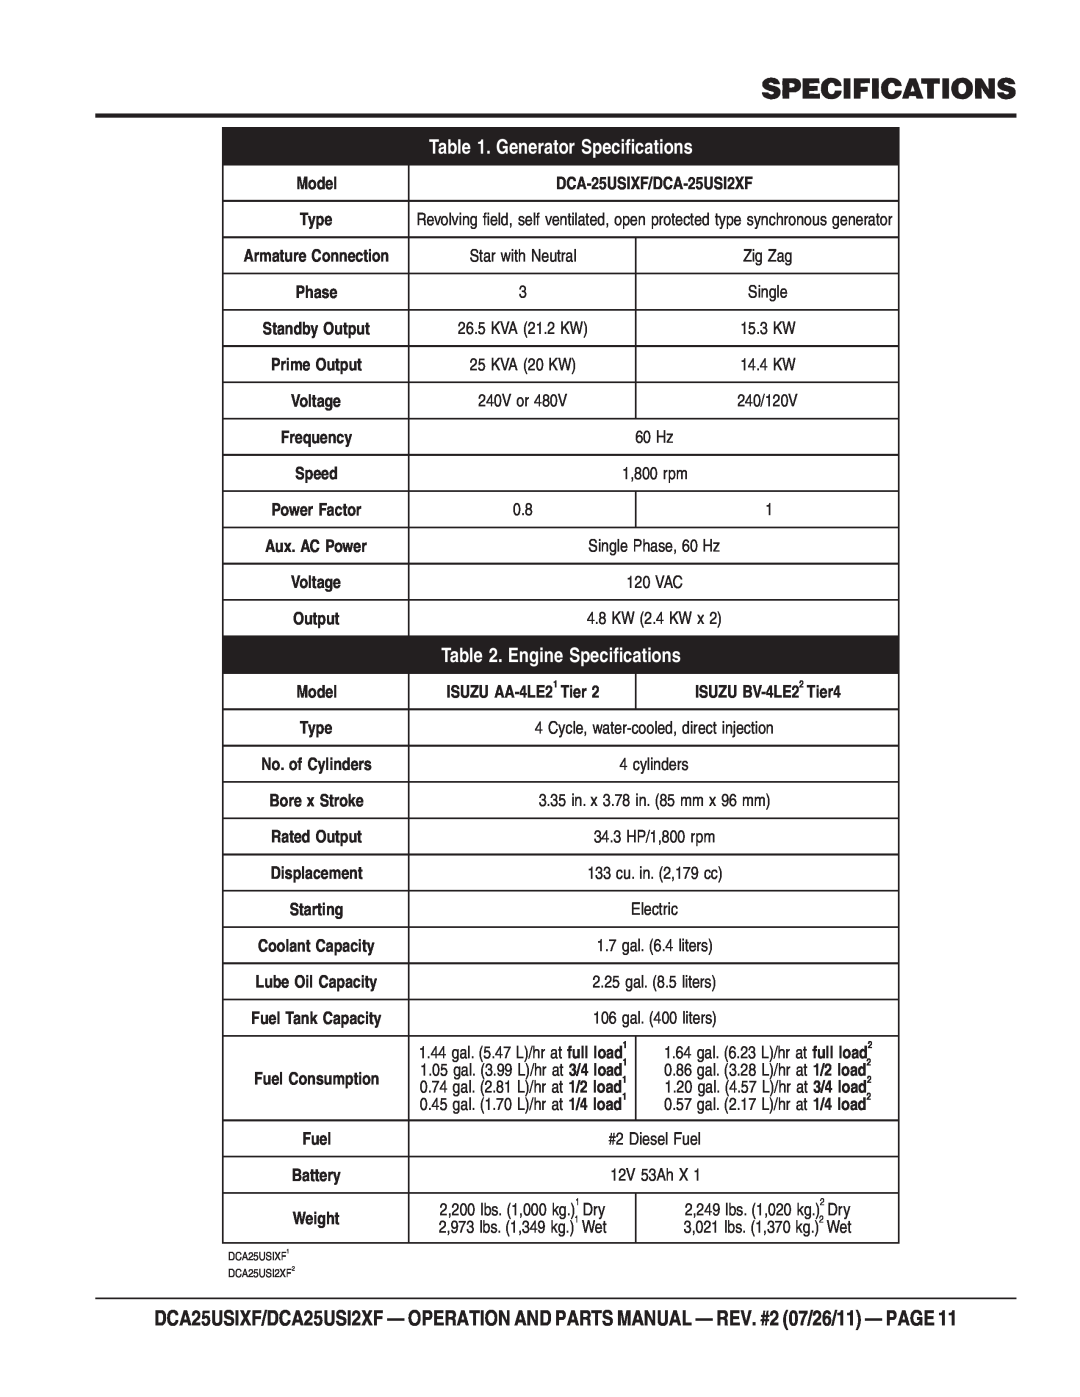 Multiquip DCA25USI2XF, DCA25USIXF operation manual Generator Specifications, Engine Specifications 